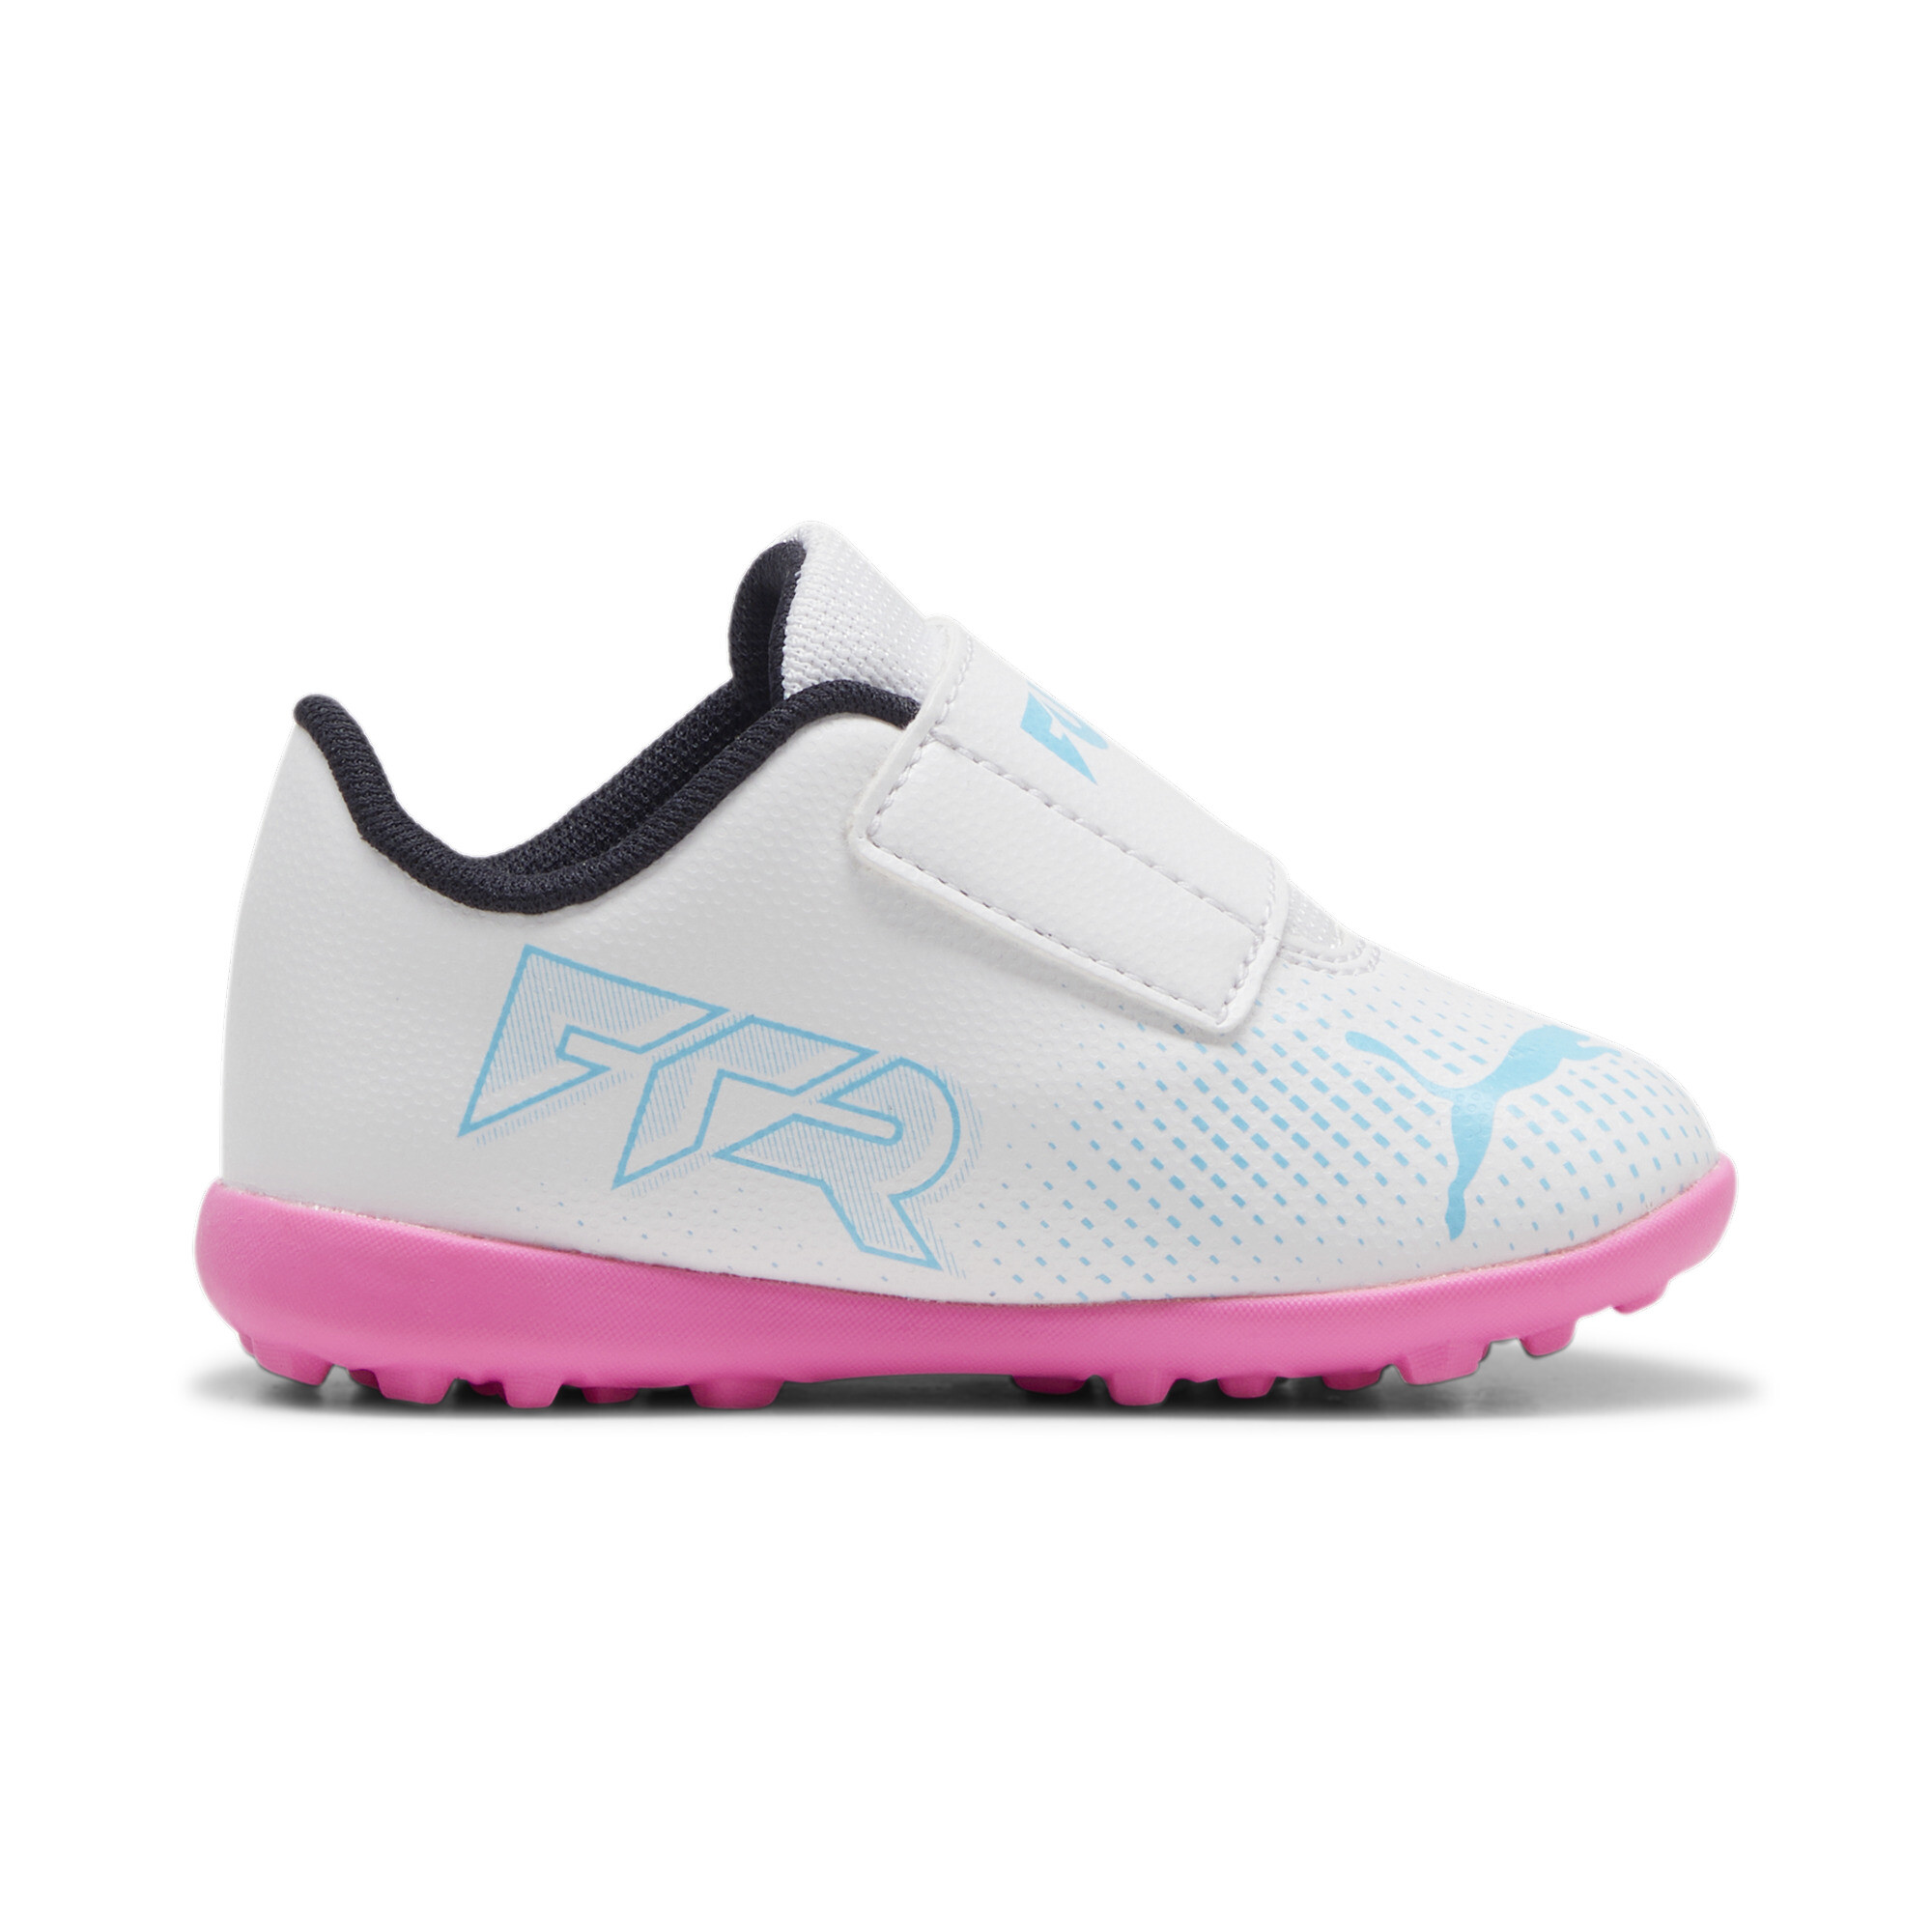 Kids' PUMA FUTURE 7 PLAY TT Toddlers' Football Boots In White/Pink, Size EU 26